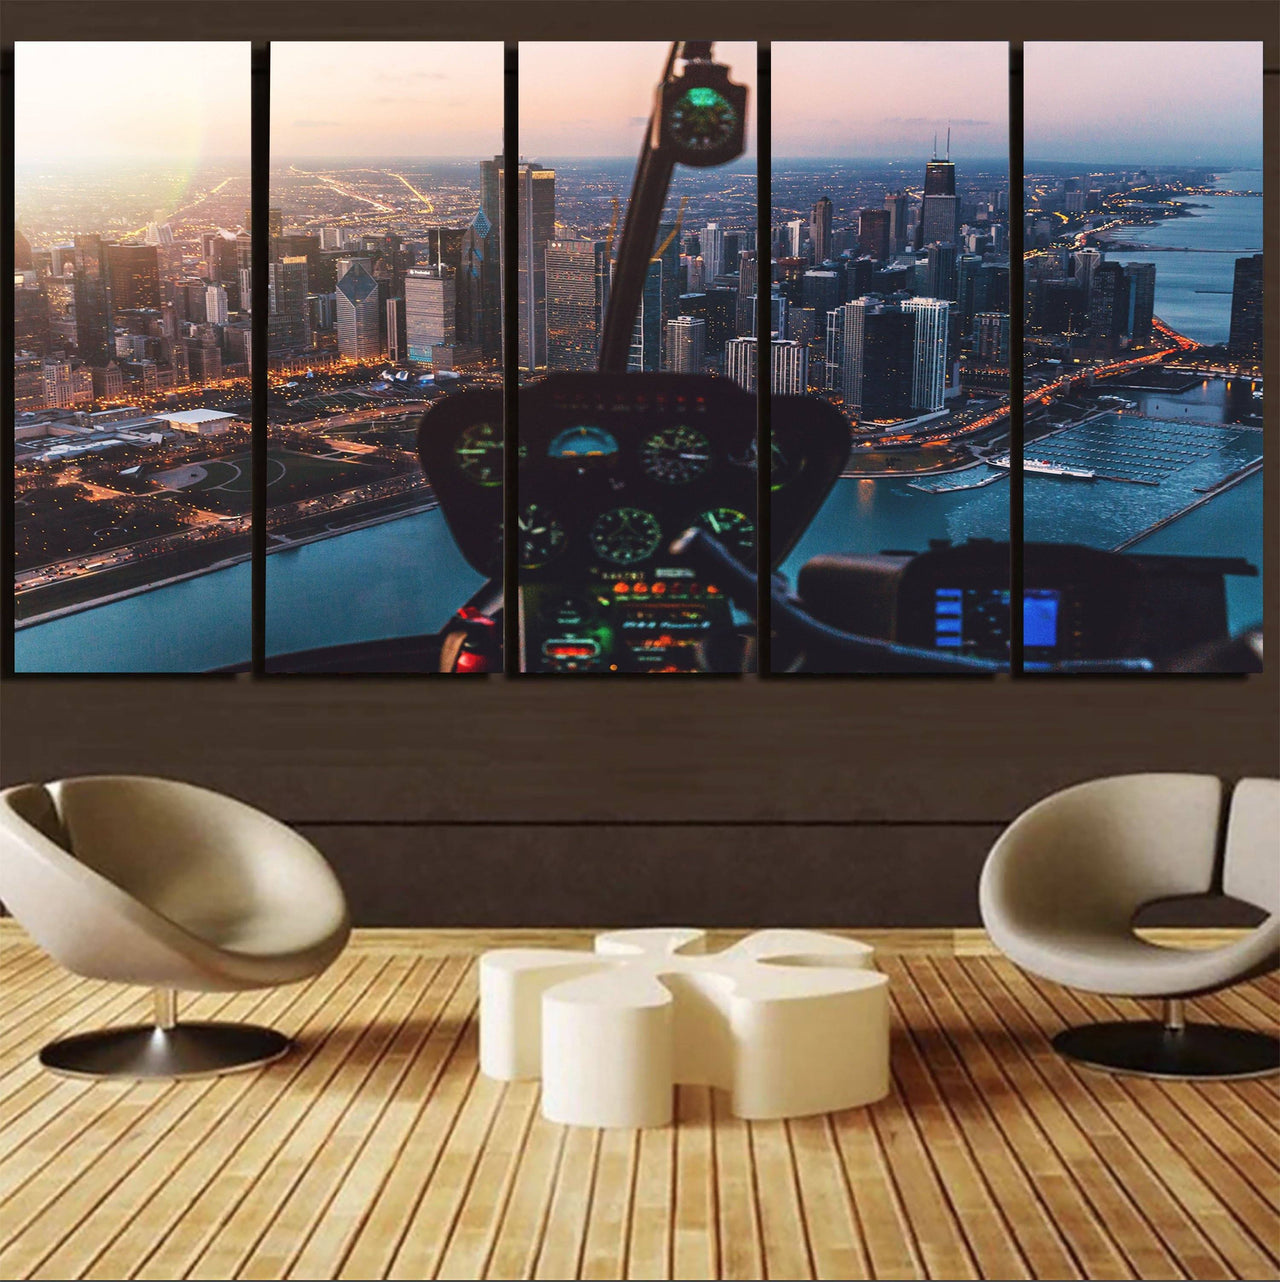 Amazing City View from Helicopter Cockpit Printed Canvas Prints (5 Pieces) Aviation Shop 